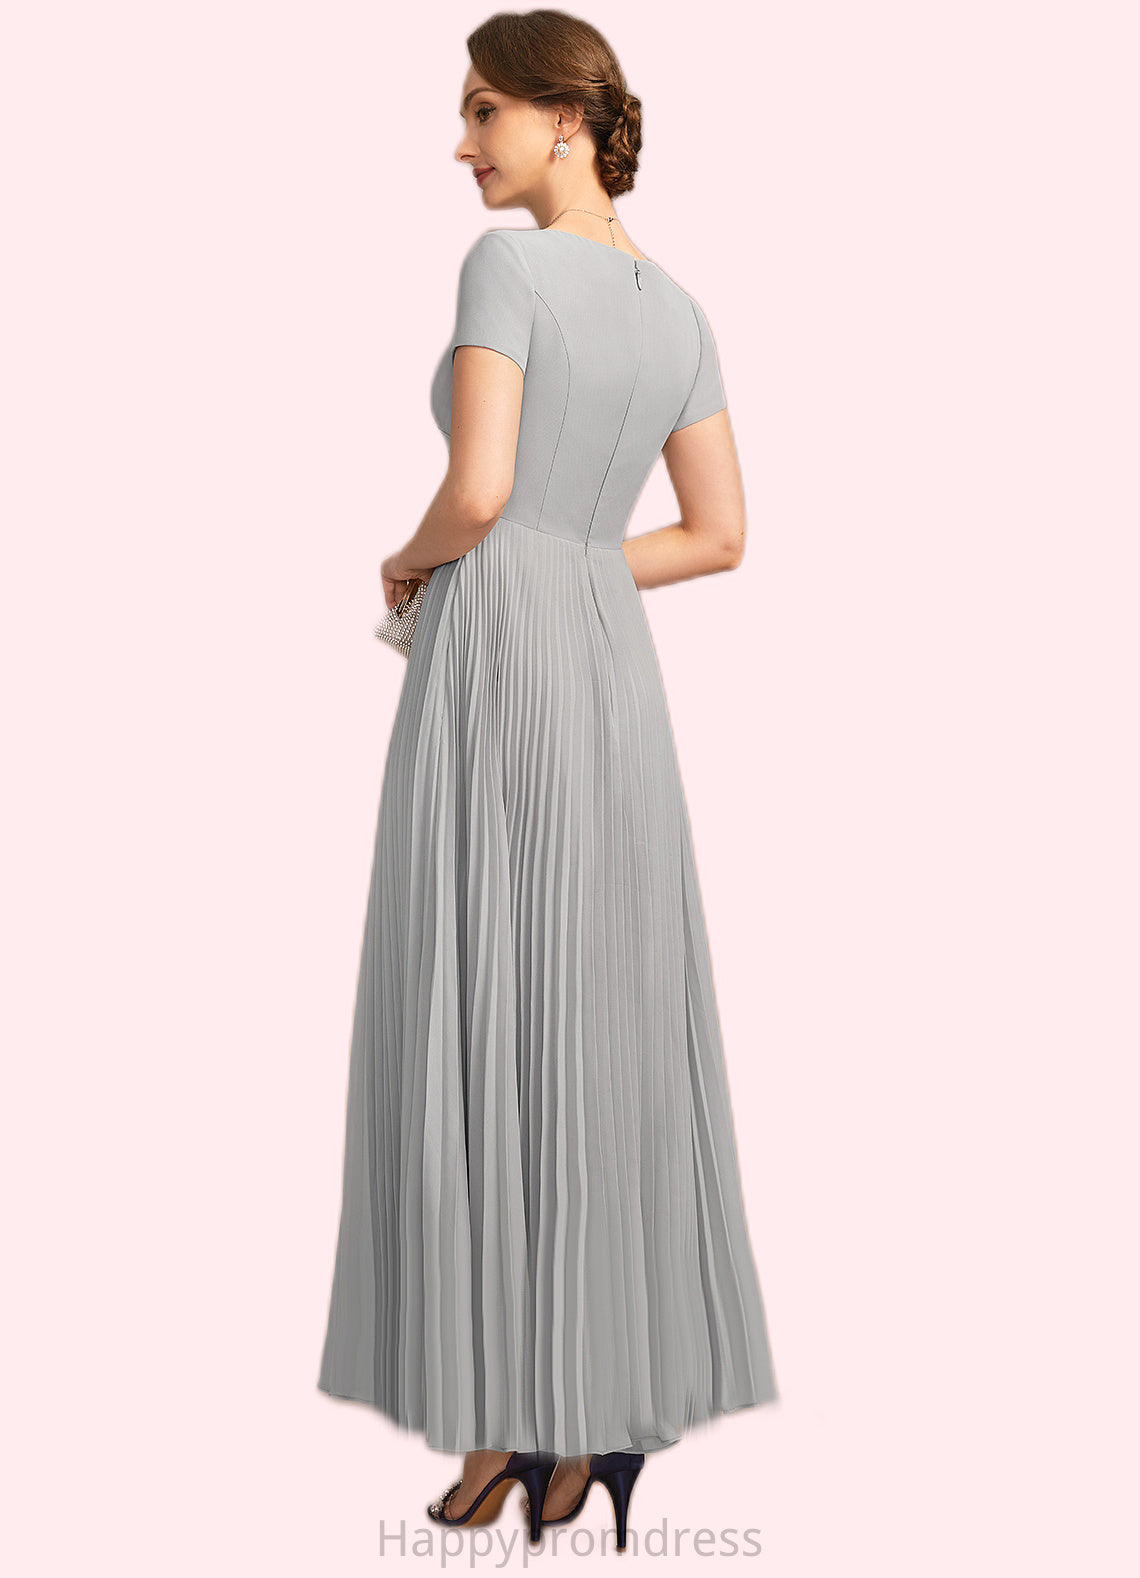 Estrella A-line V-Neck Ankle-Length Chiffon Mother of the Bride Dress With Pleated XXSP0021777